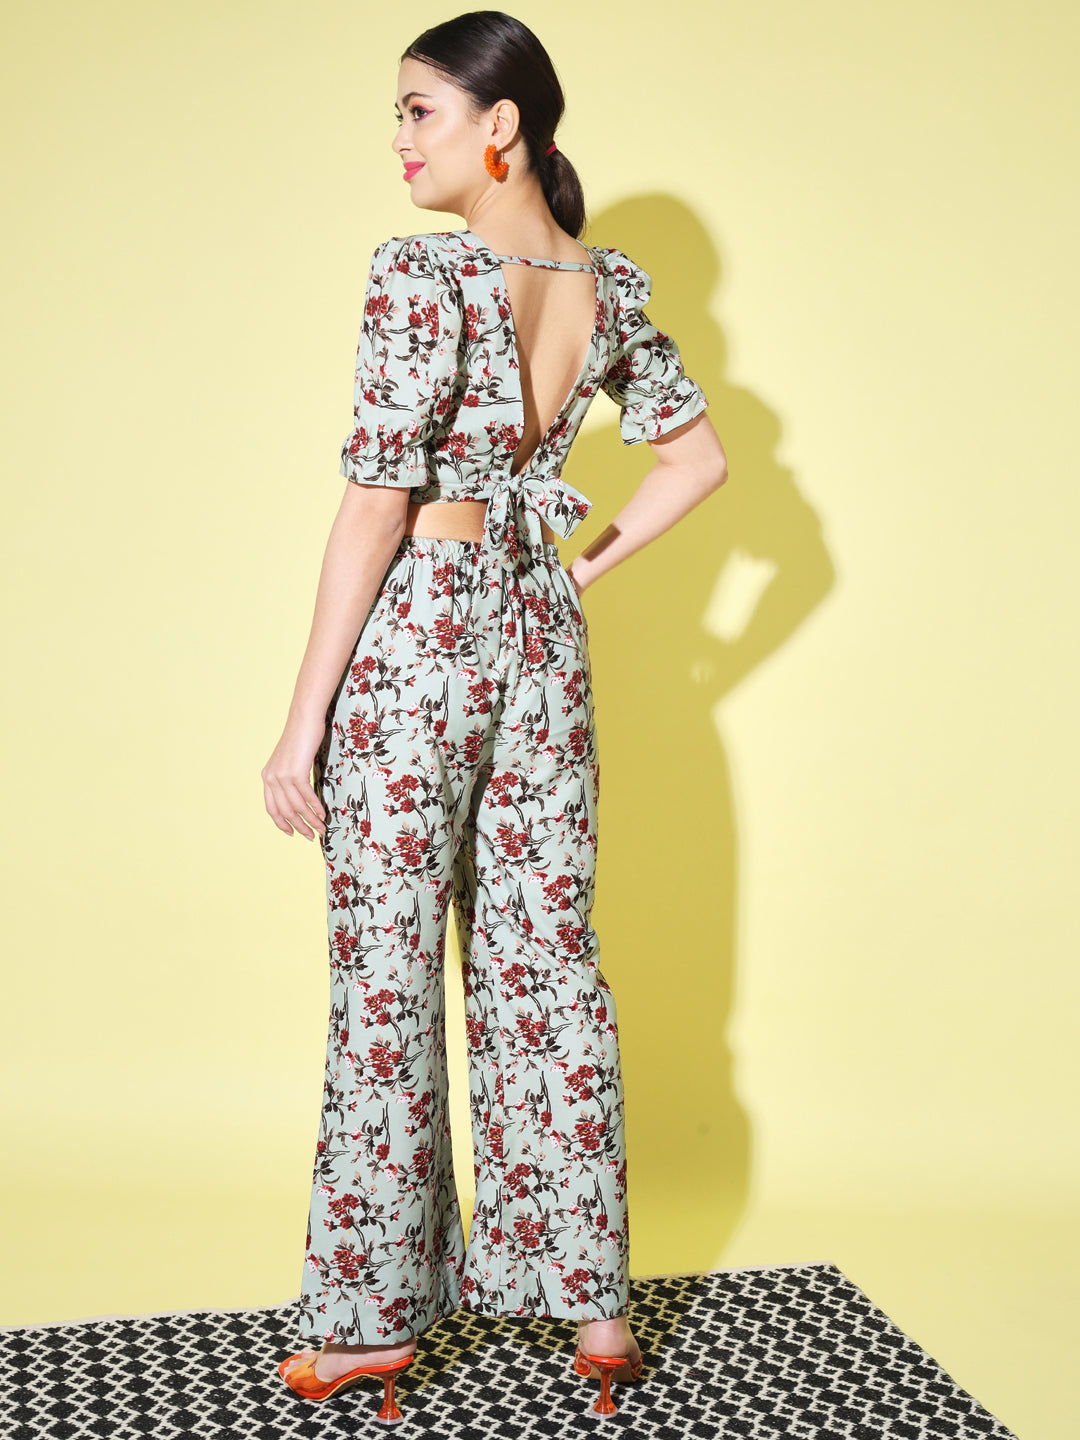 Women's Top with Pant Botnical Printed Co-ord Set